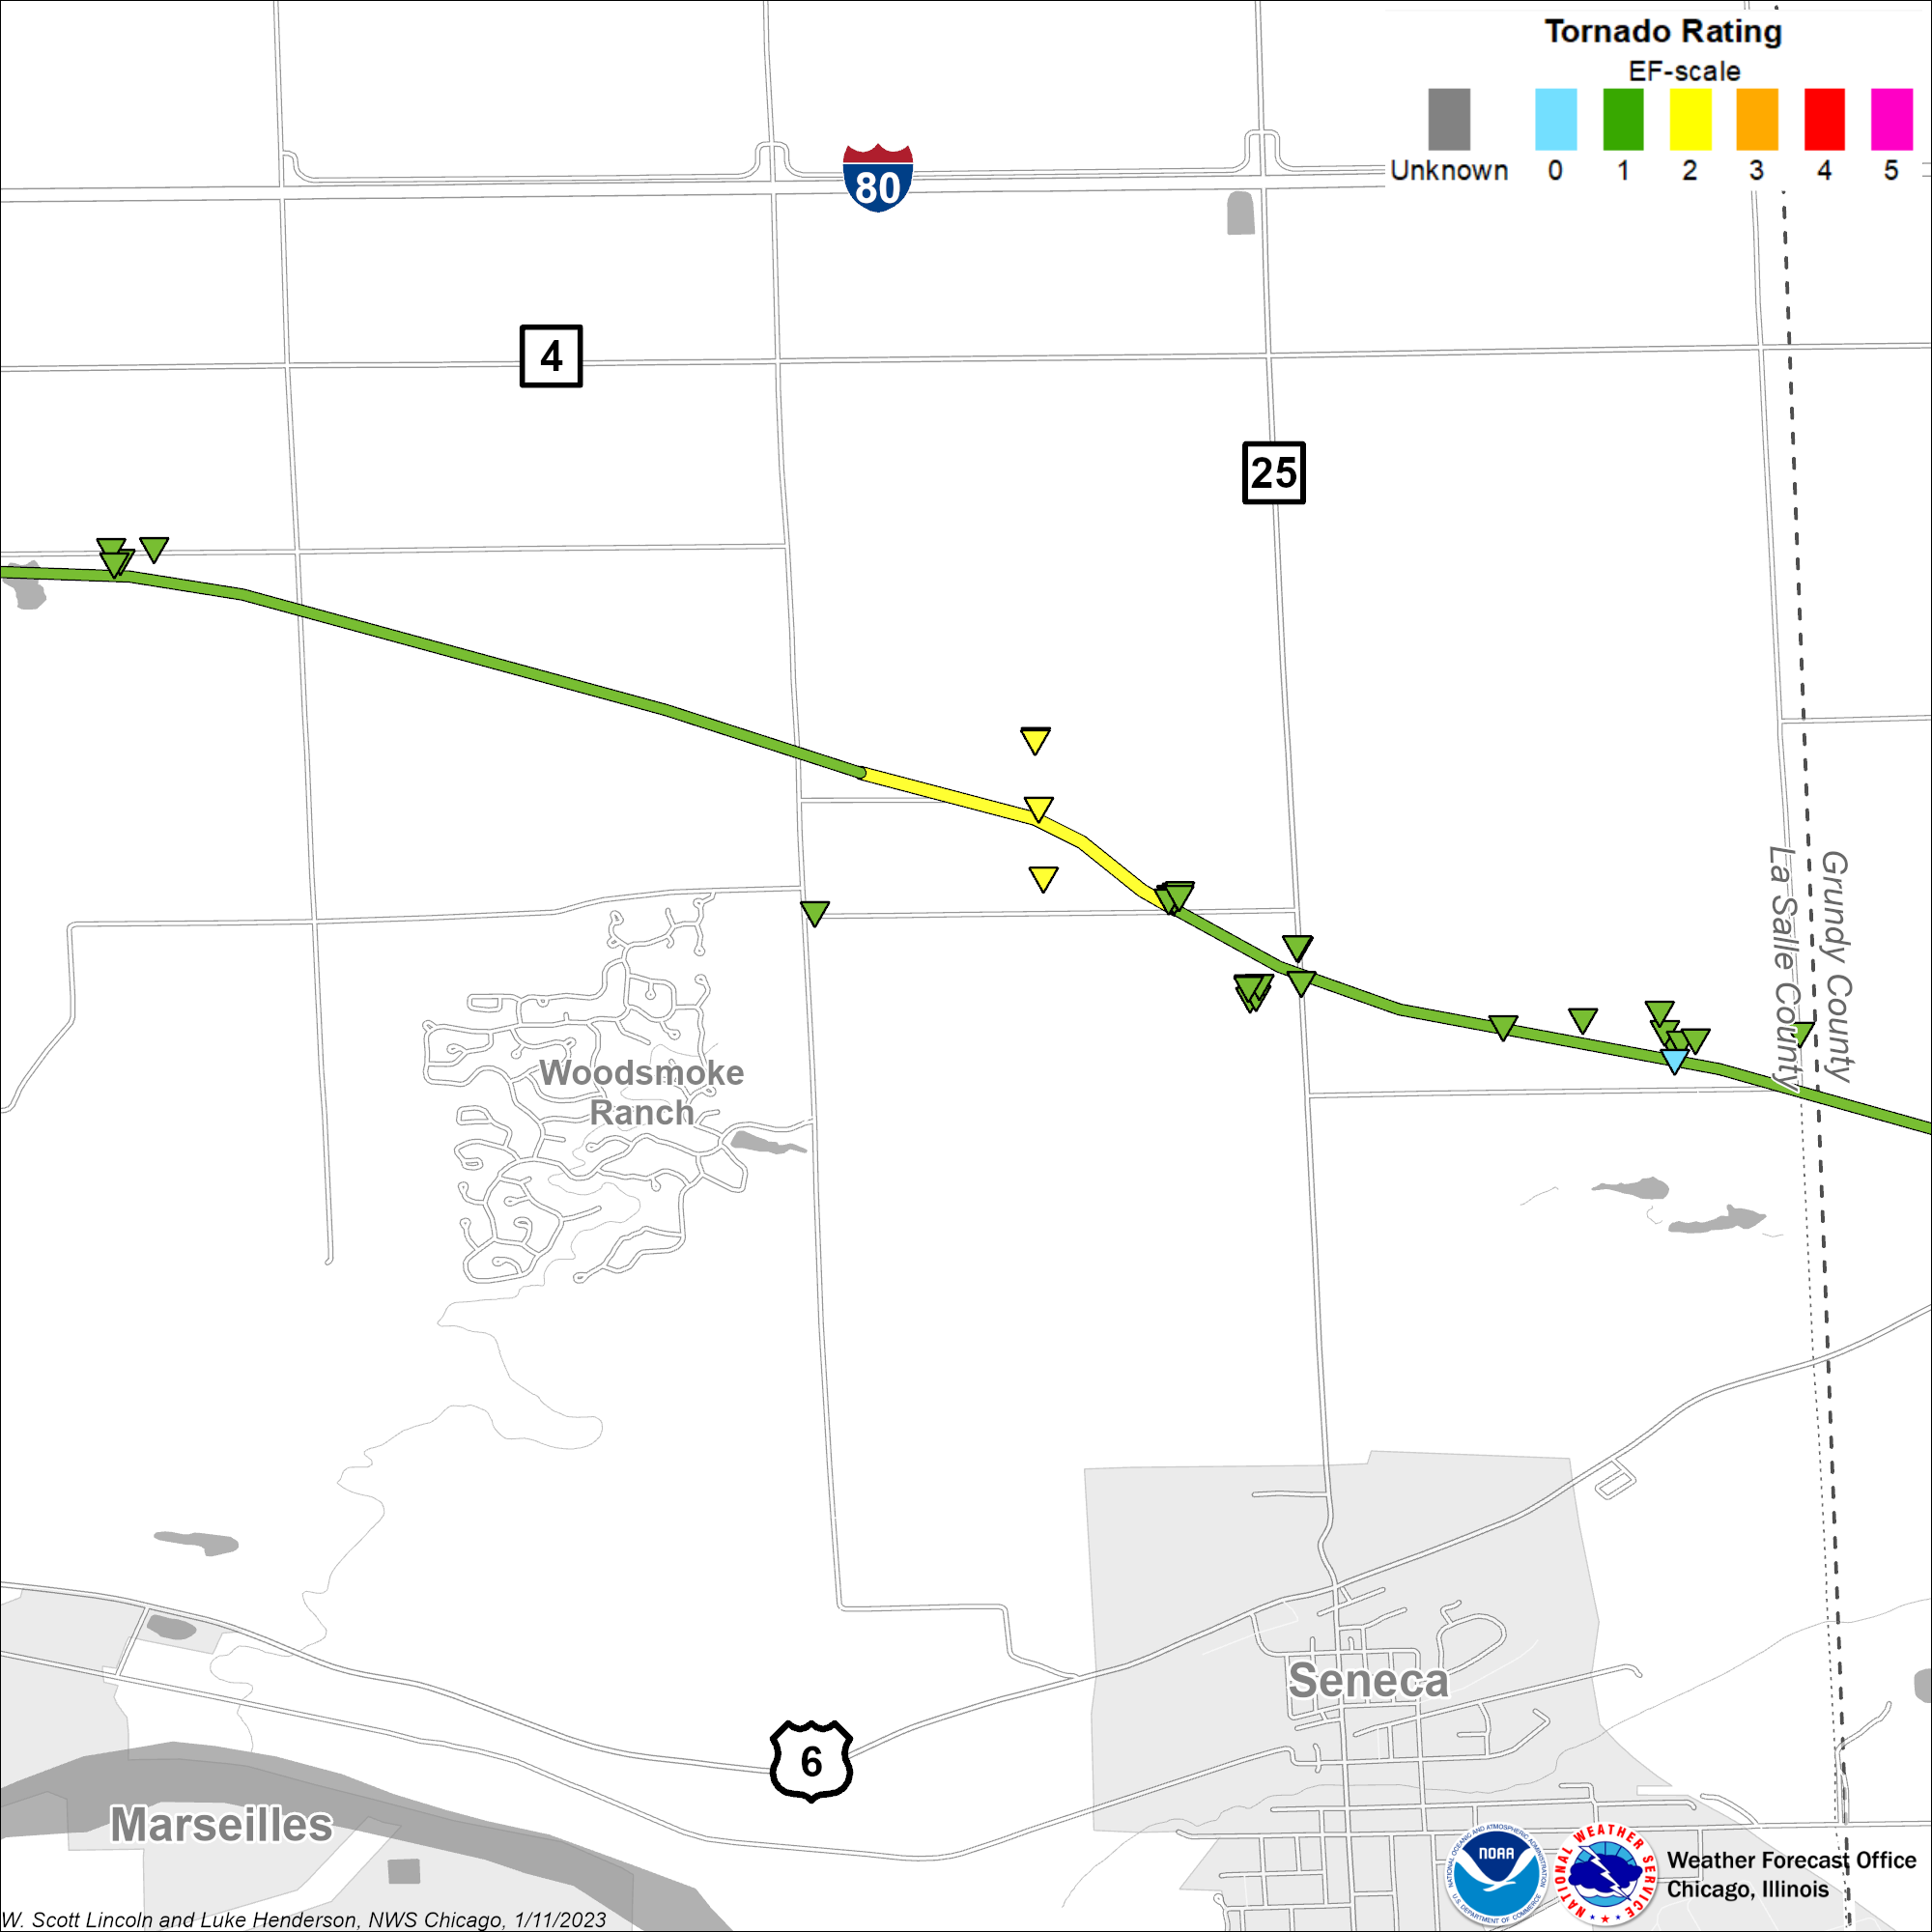 Map showing track of the Marseilles-Seneca tornado, zoomed in to the area of most intense damage